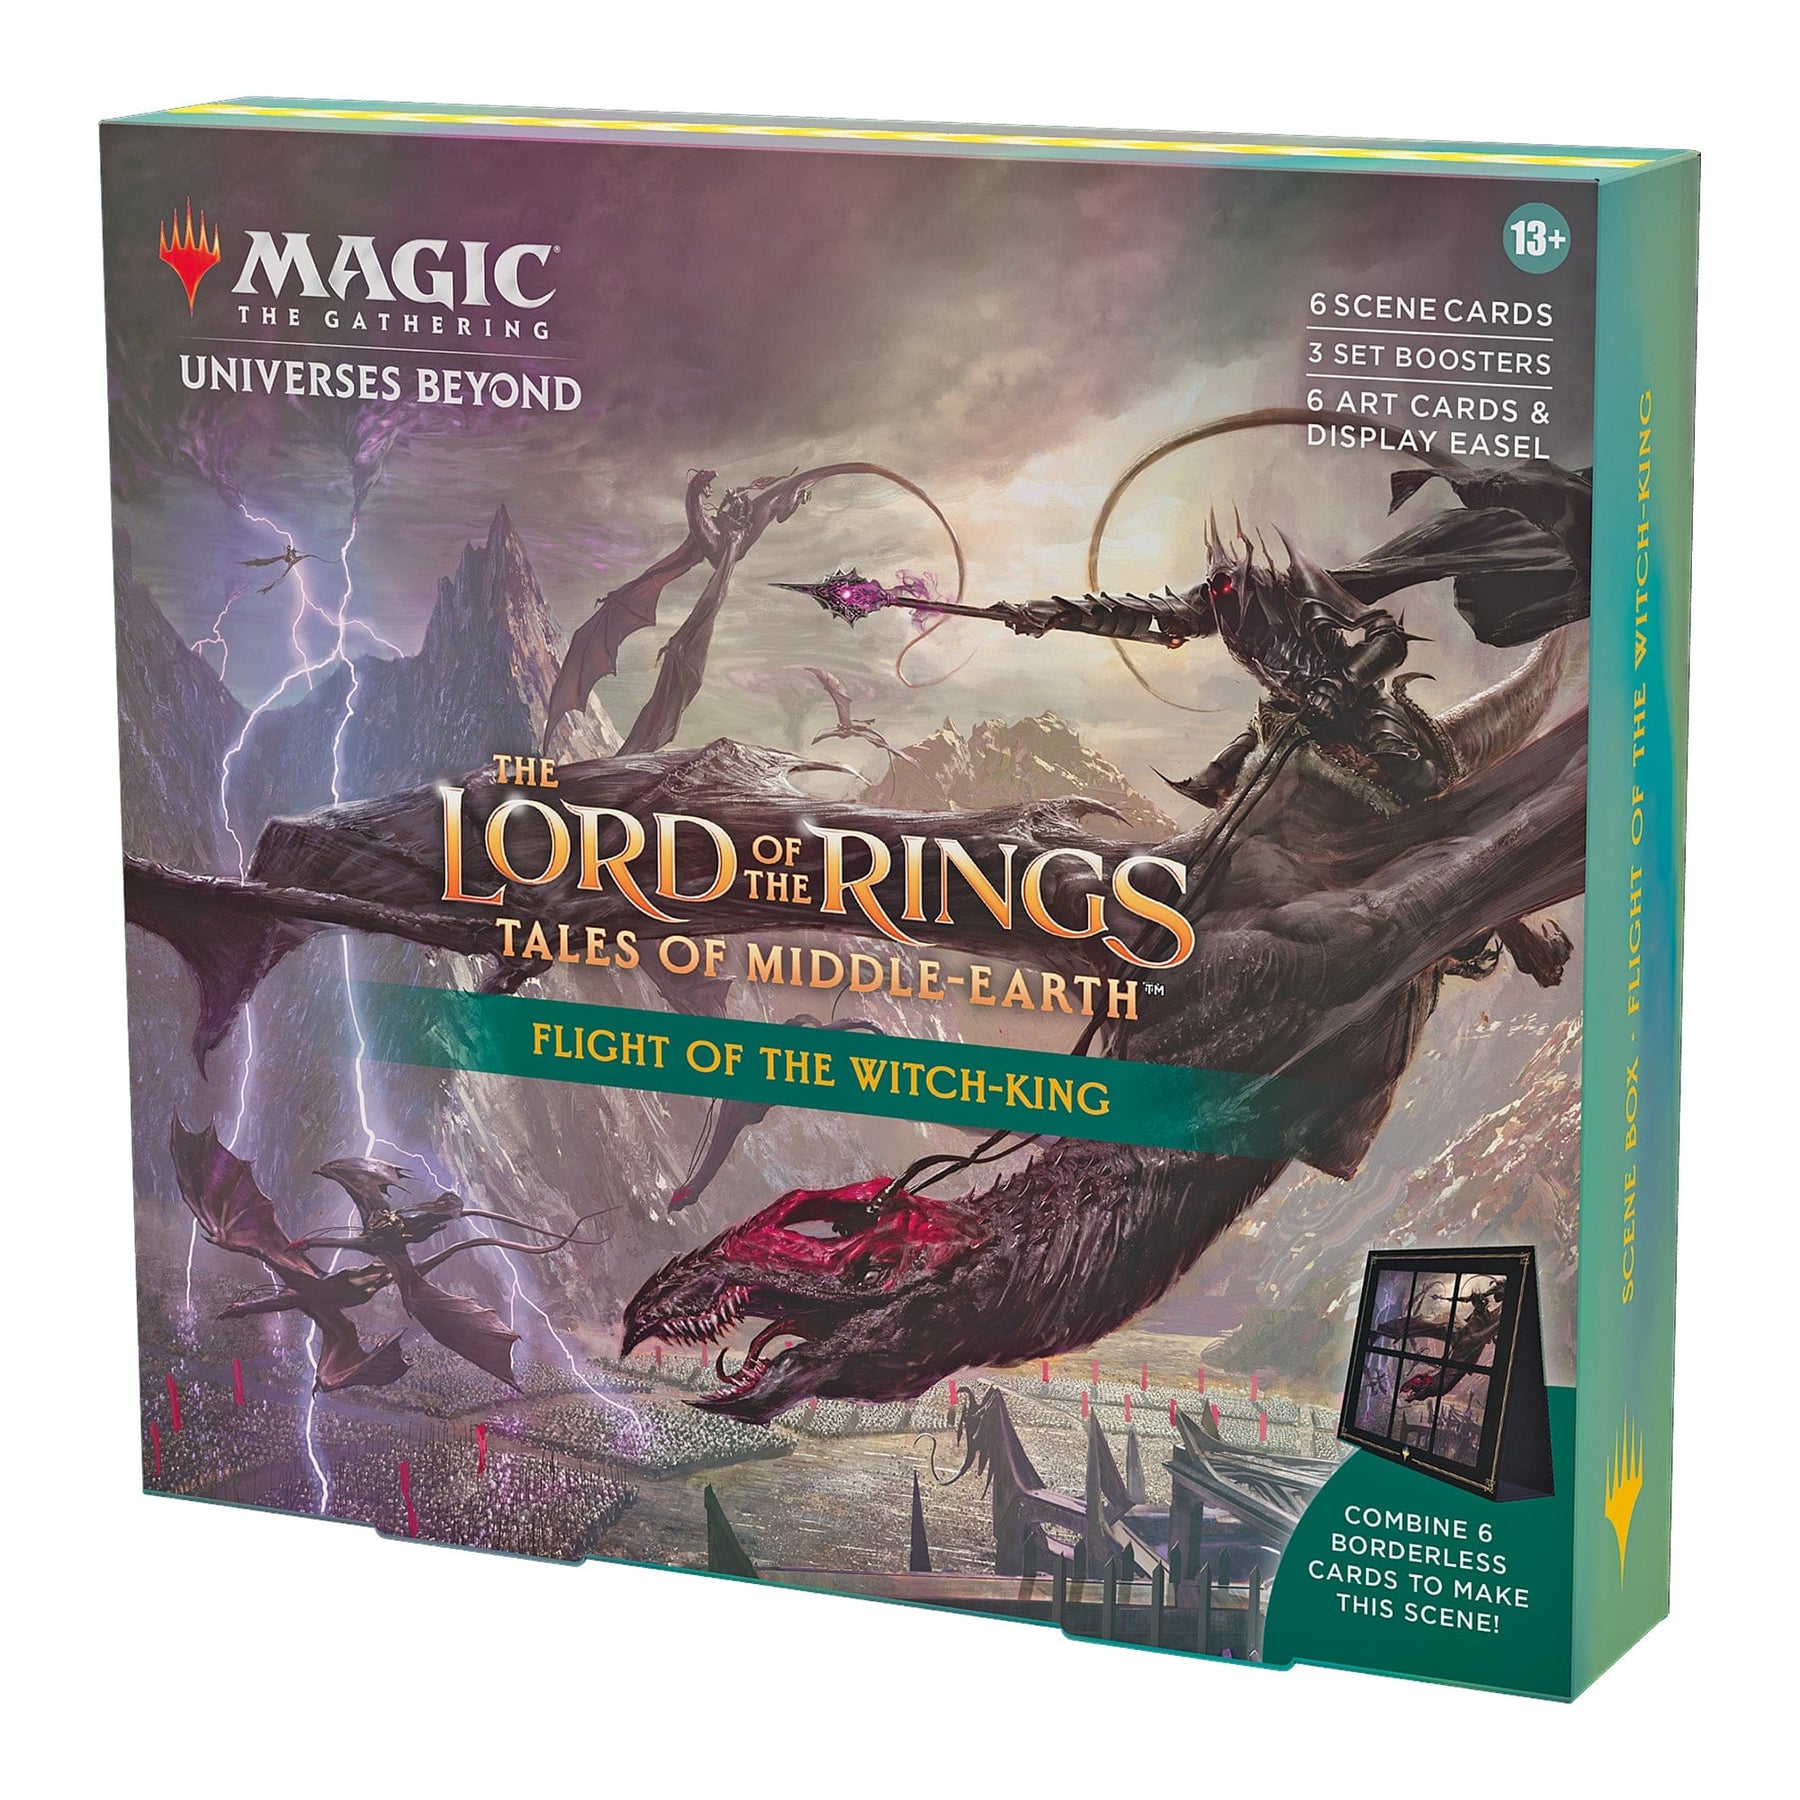 Magic the Gathering CCG: The Lord of the Rings - Tales of Middle-earth Scene Box - Flight of the Witchking